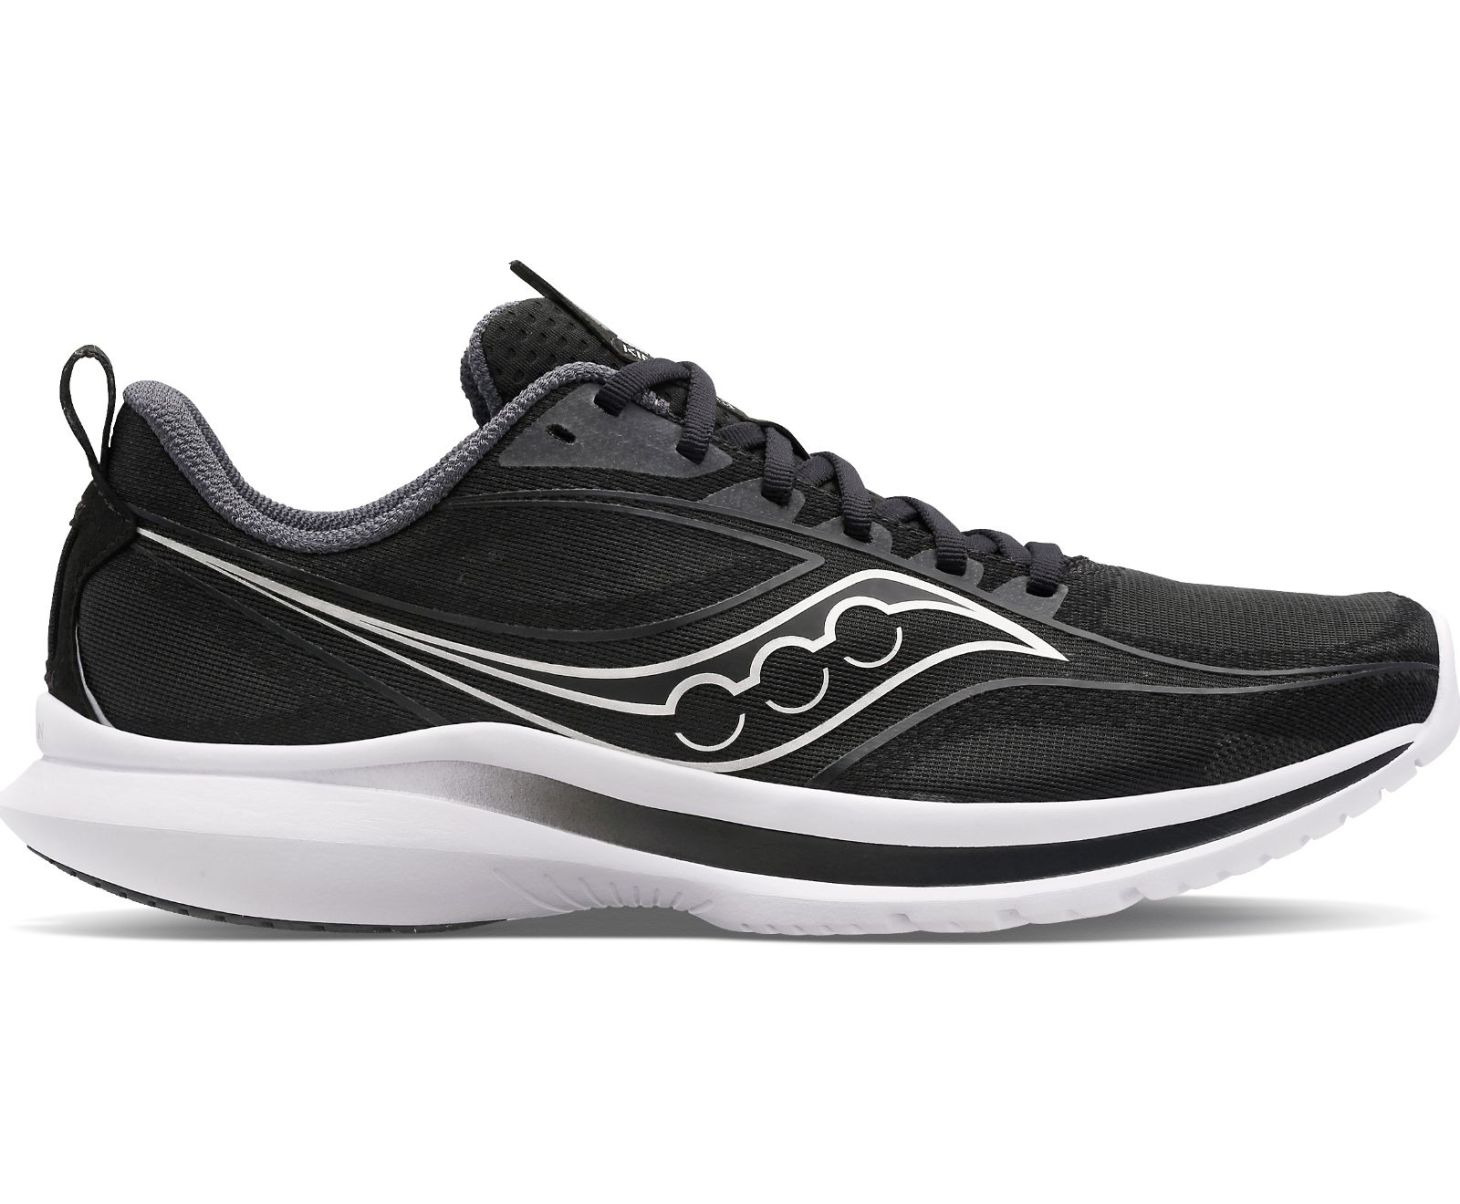 Saucony Kinvara, one of the best running shoes for sciatica